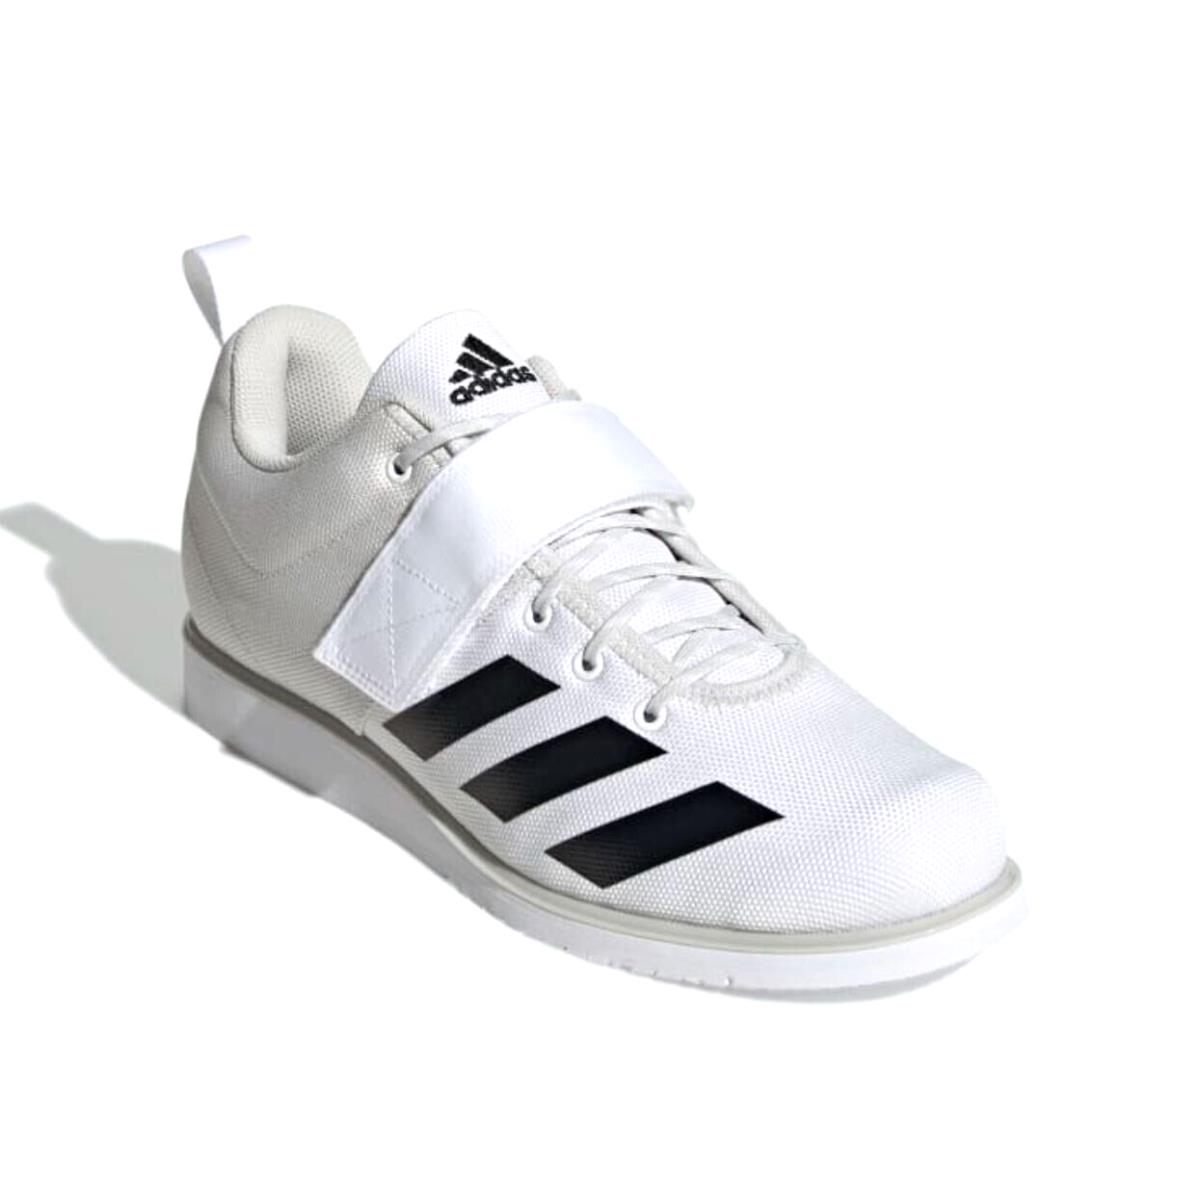 Mens Adidas Powerlift 4 Weightlifting Shoes Size US 11 GZ5871